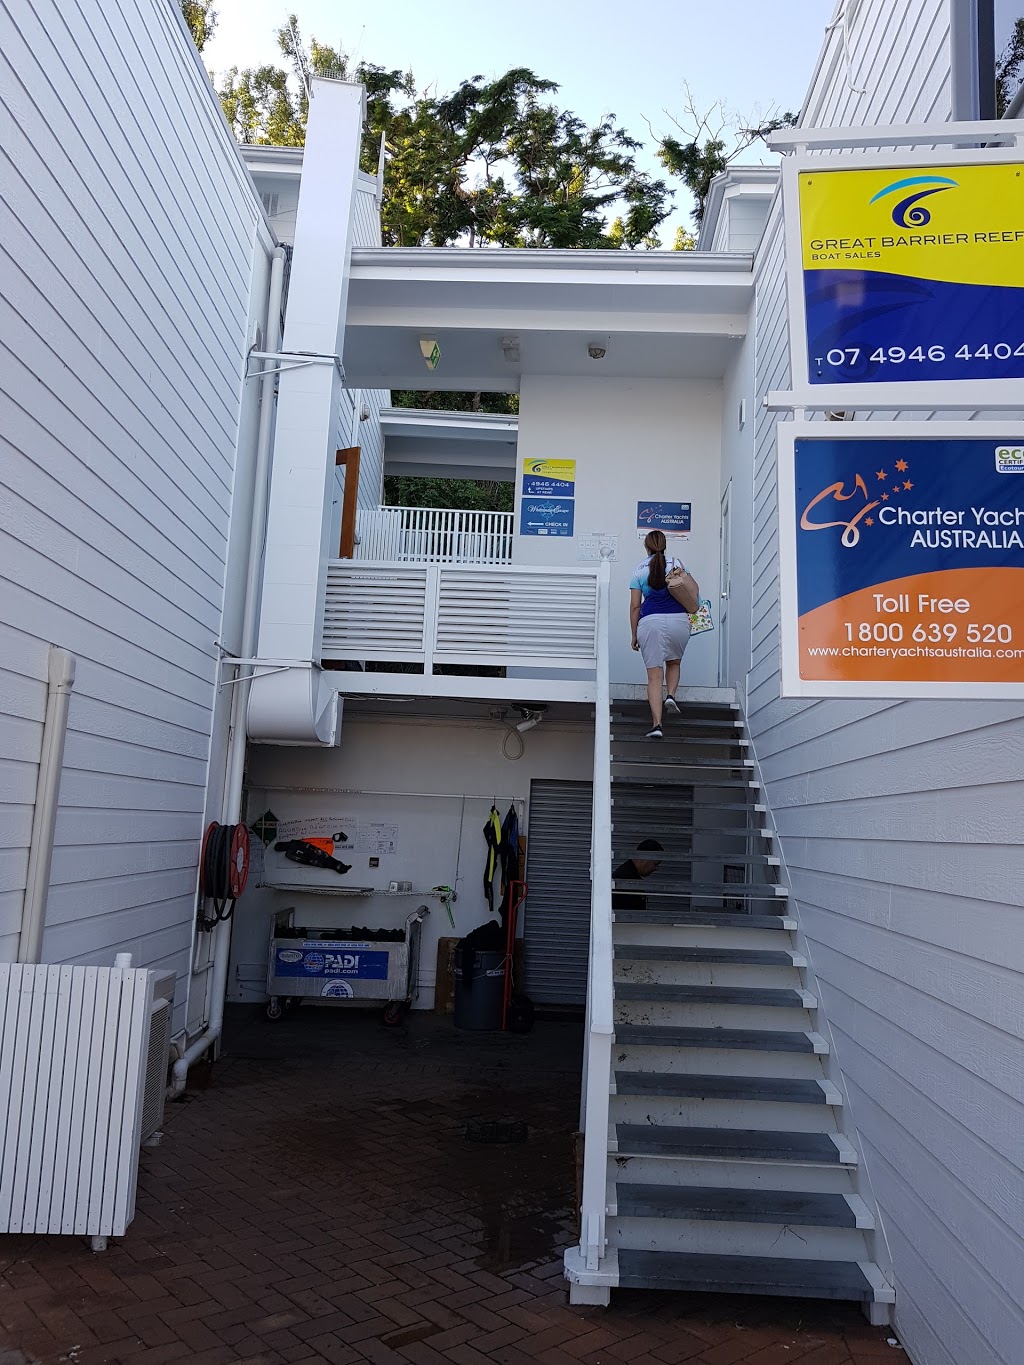 Great Barrier Reef Boat Sales | store | Abell Point Marina, 19/1 Shingley Dr, Airlie Beach QLD 4802, Australia | 0749464404 OR +61 7 4946 4404